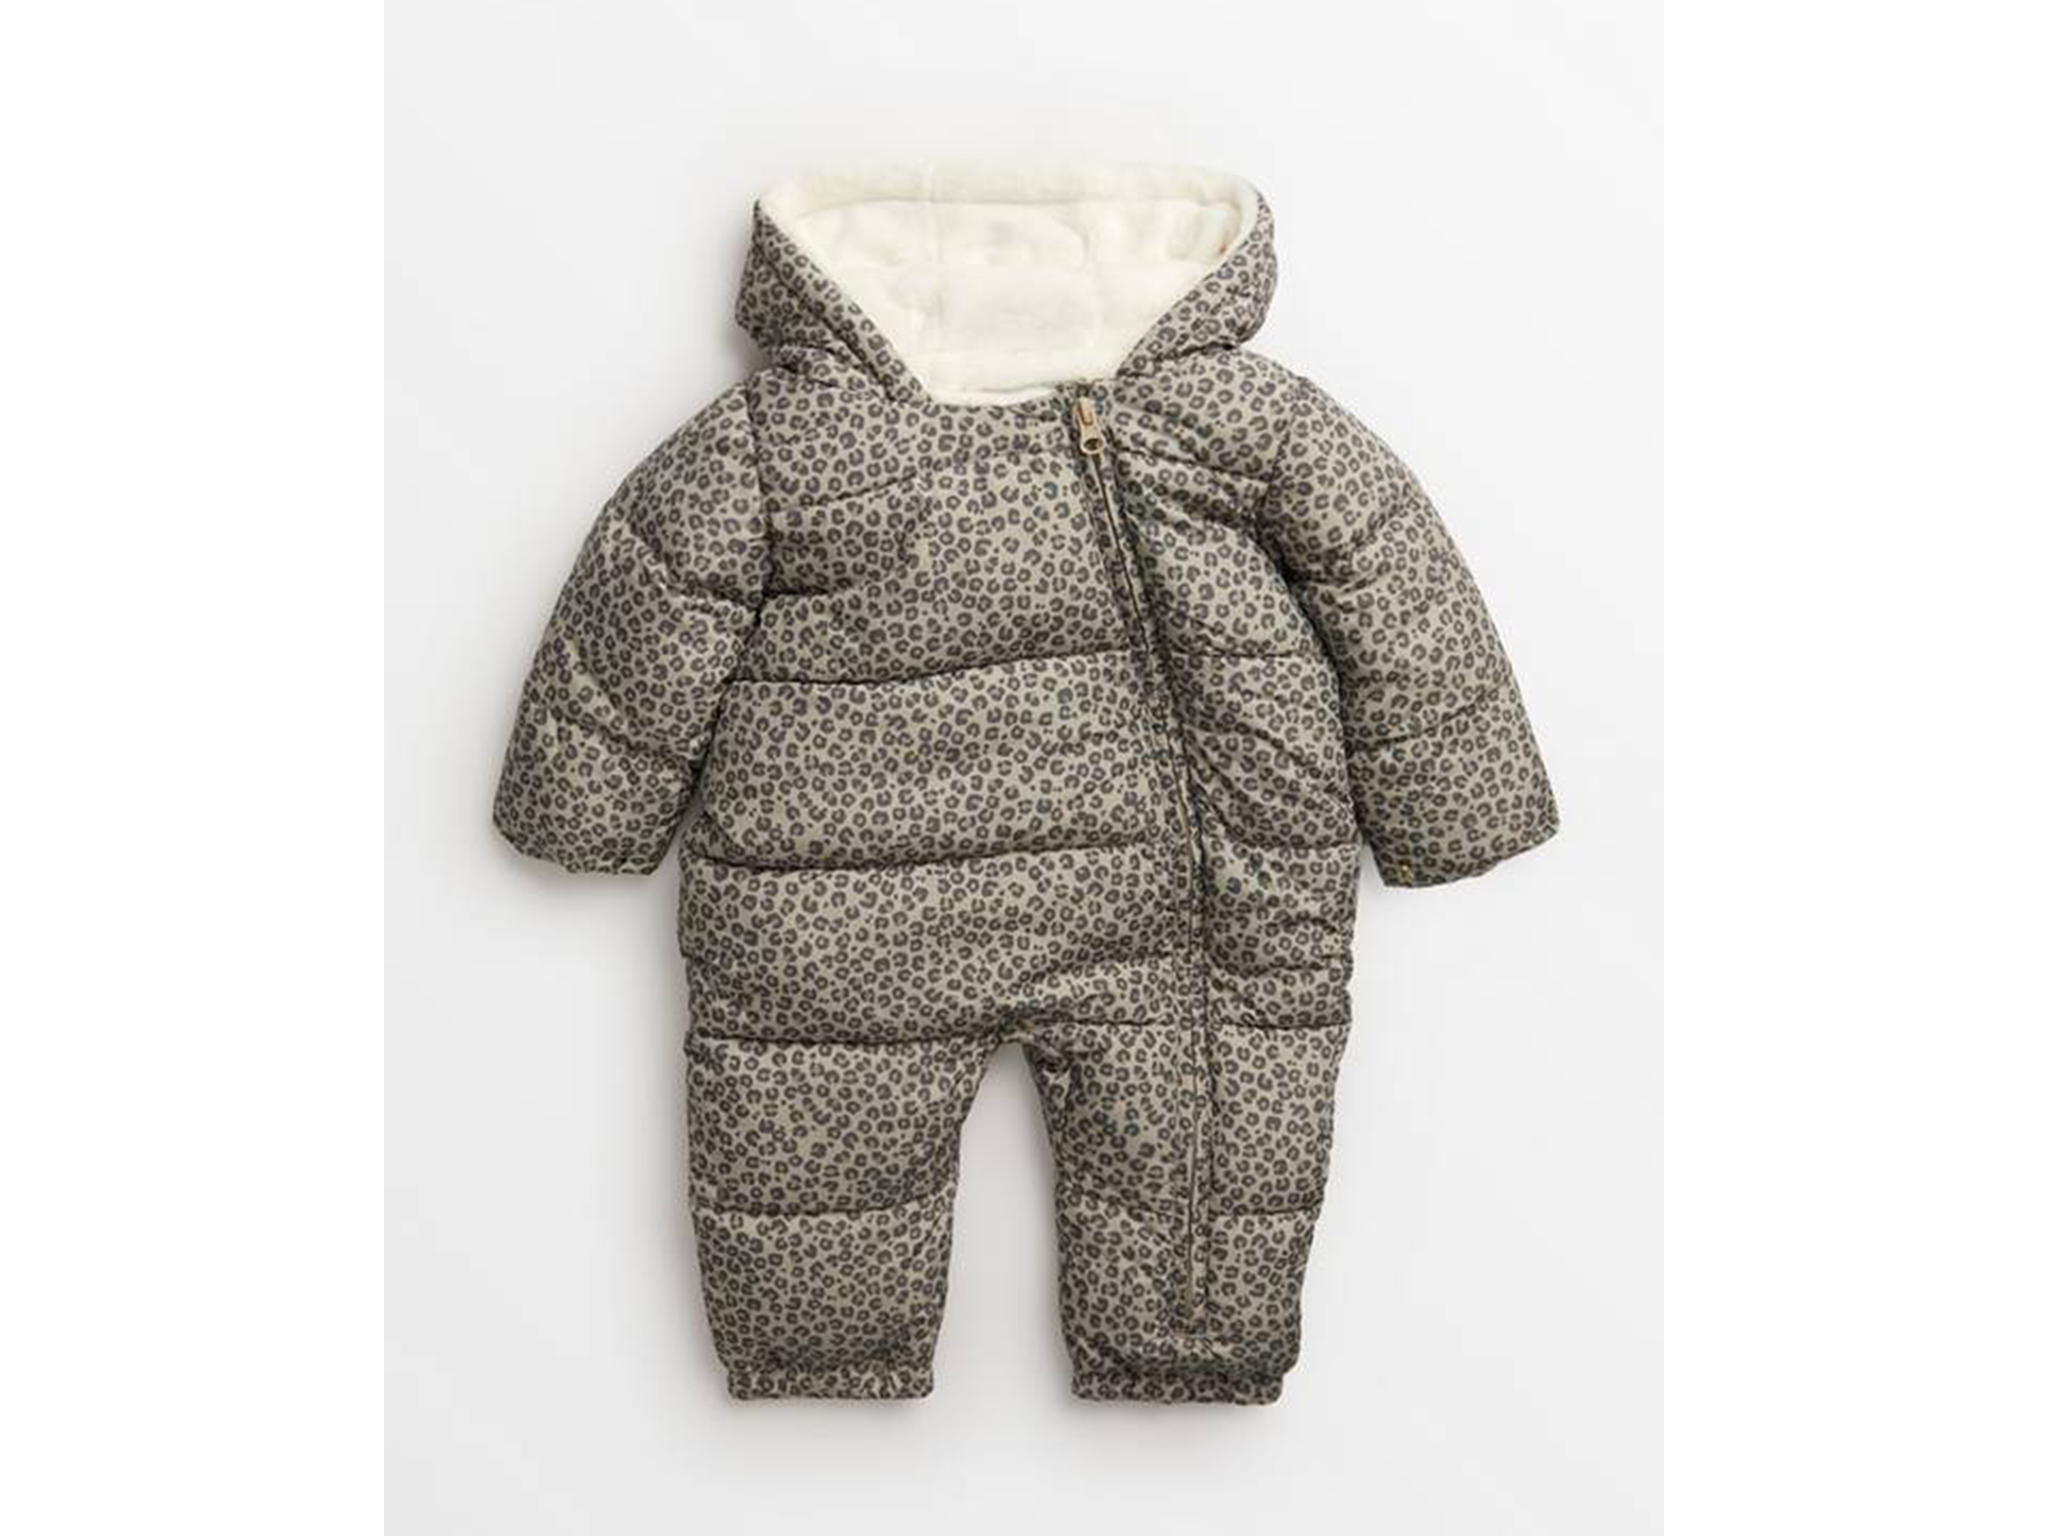 Warm baby winter jumpsuit - BABY SUITS – Nayliss